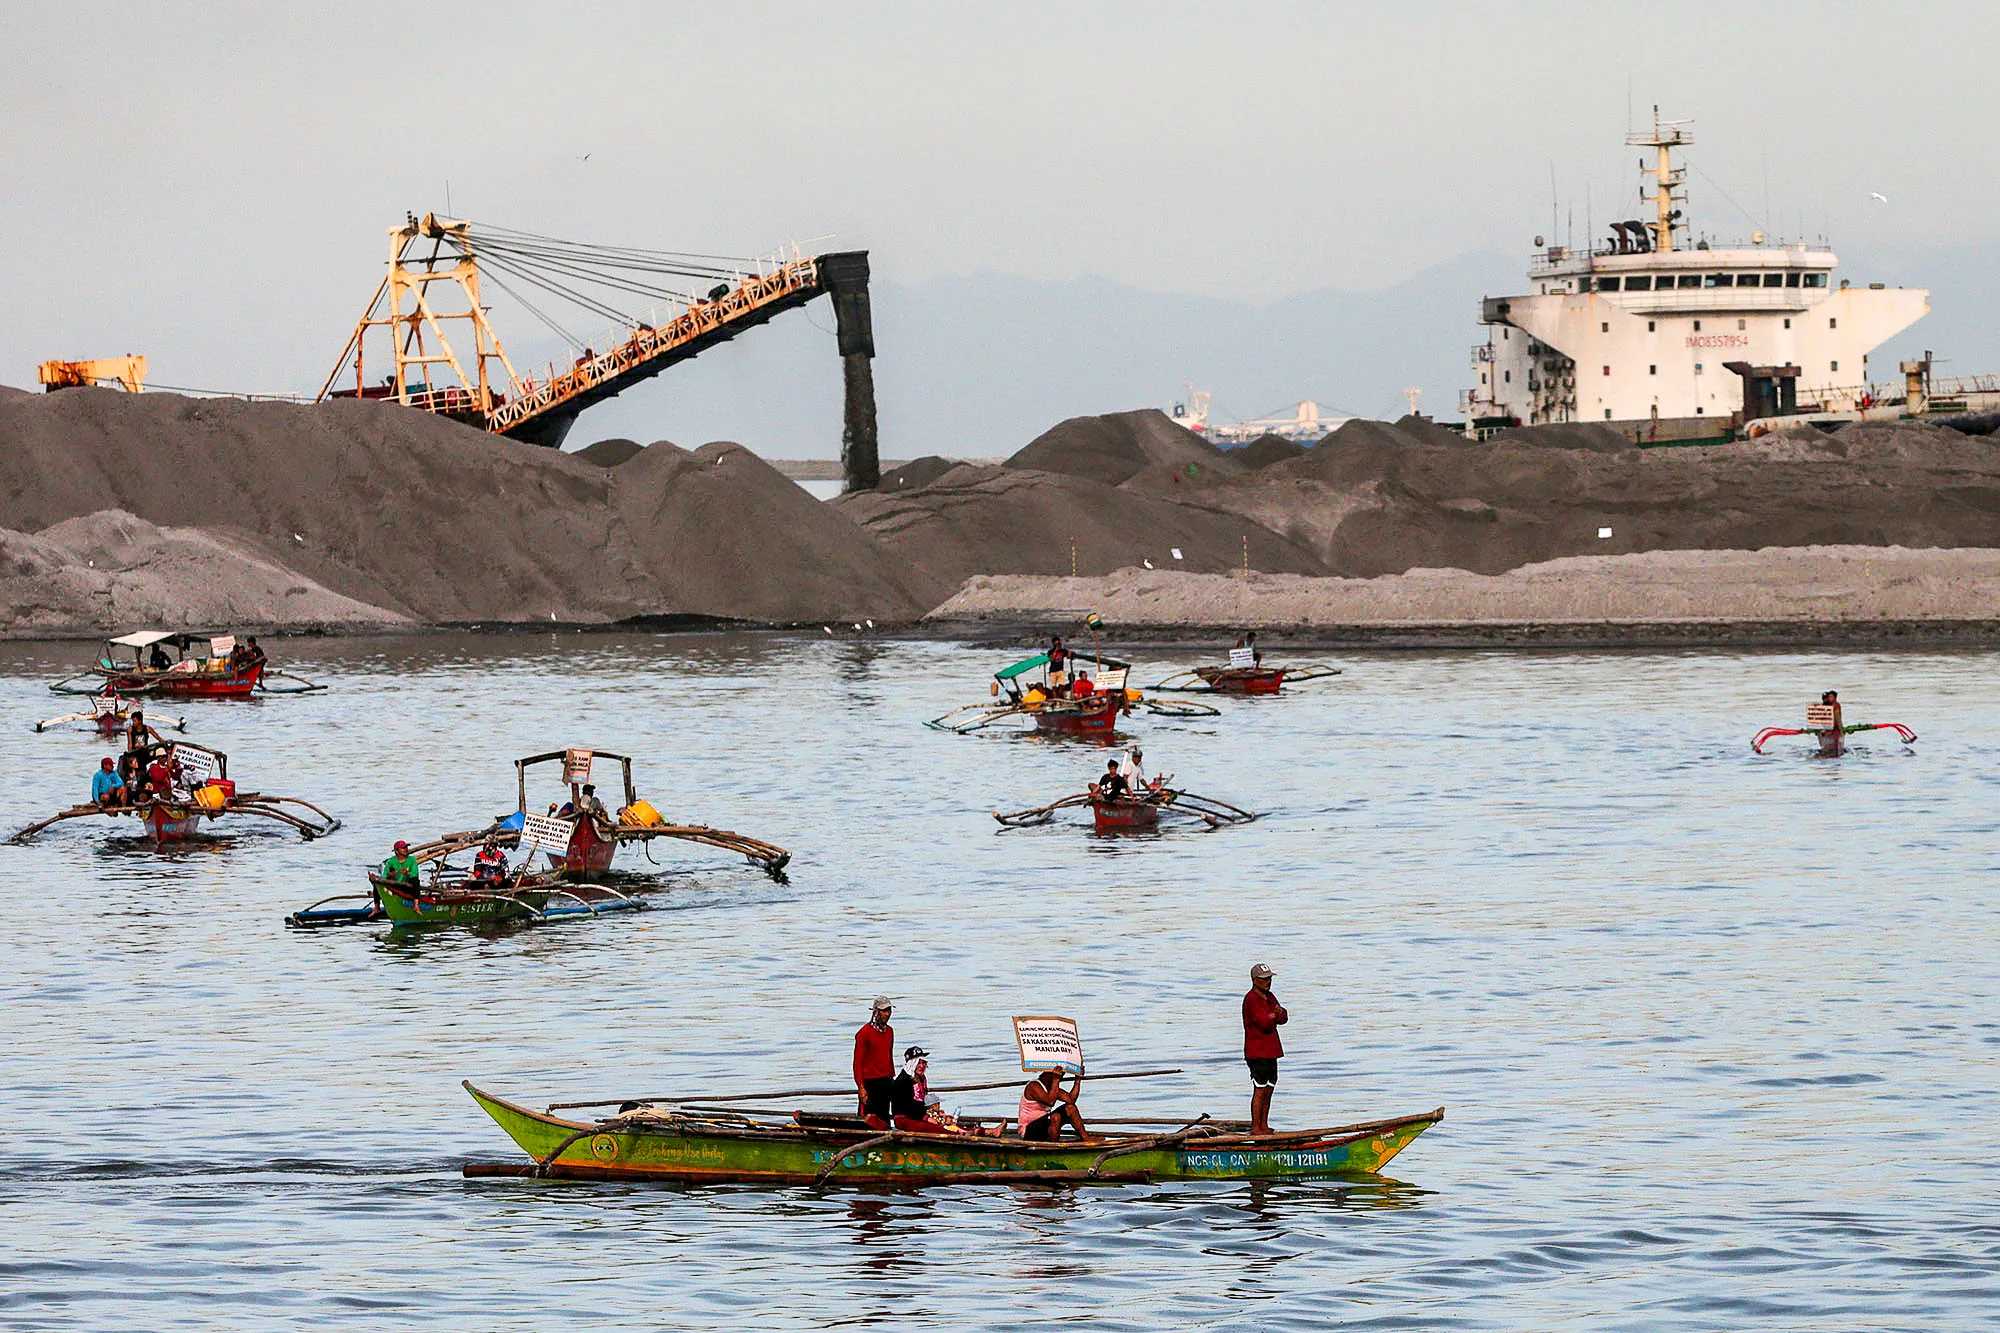 PBBM: All reclamations in Manila bay are suspended, except one project